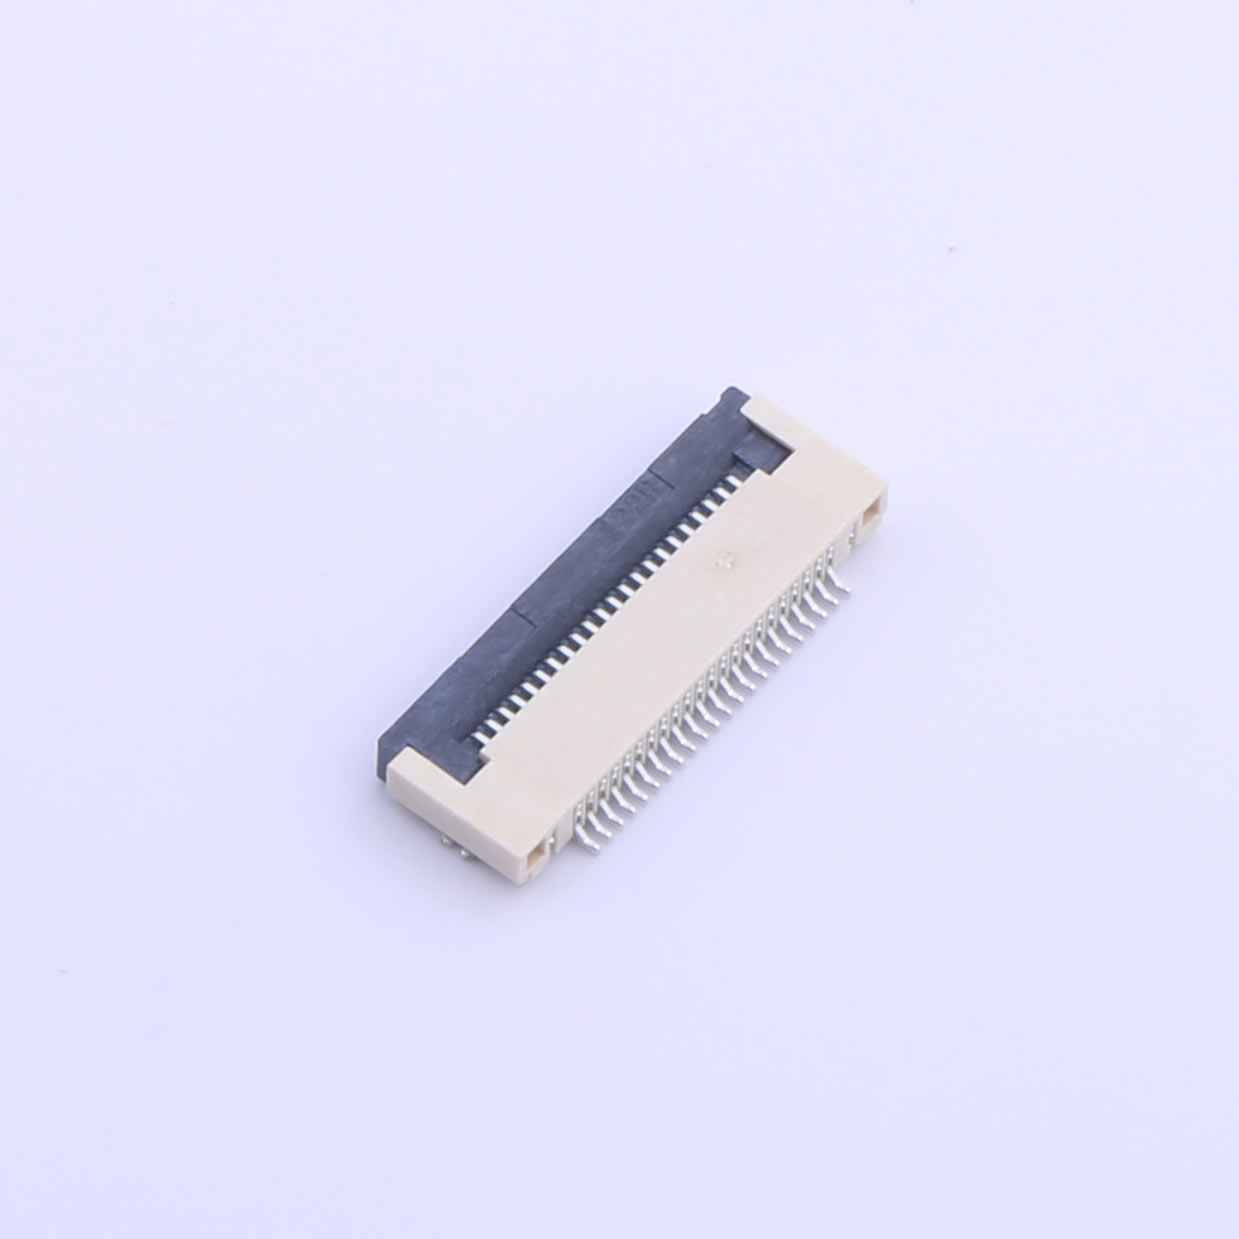 Kinghelm 0.5mm Pitch FPC FFC Connector 22P Height 2mm Front Flip Bottom Contact SMT FPC Connector